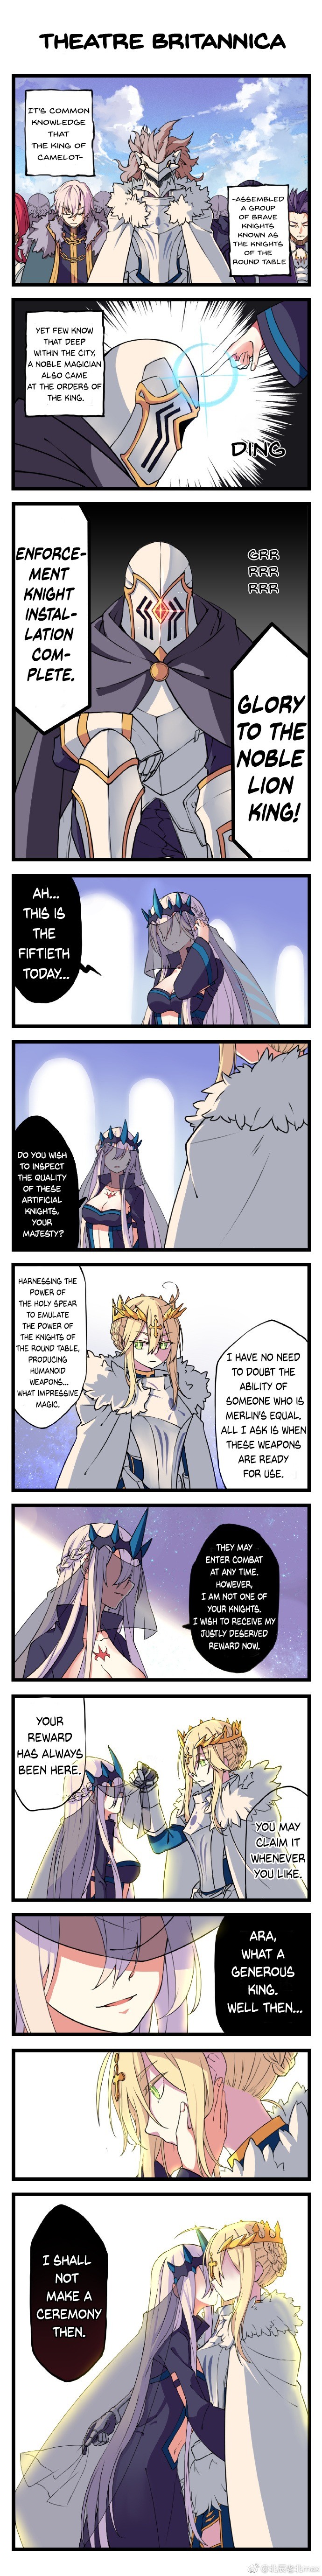 The Lion King & The Evil Witch. Source misadventuresin_camelot/ join list: Fate (425 subs)Mention History join list:. This is cute and all, but are we just gonna gloss over the fact that she gave the go-ahead for genocide of the mountain people?